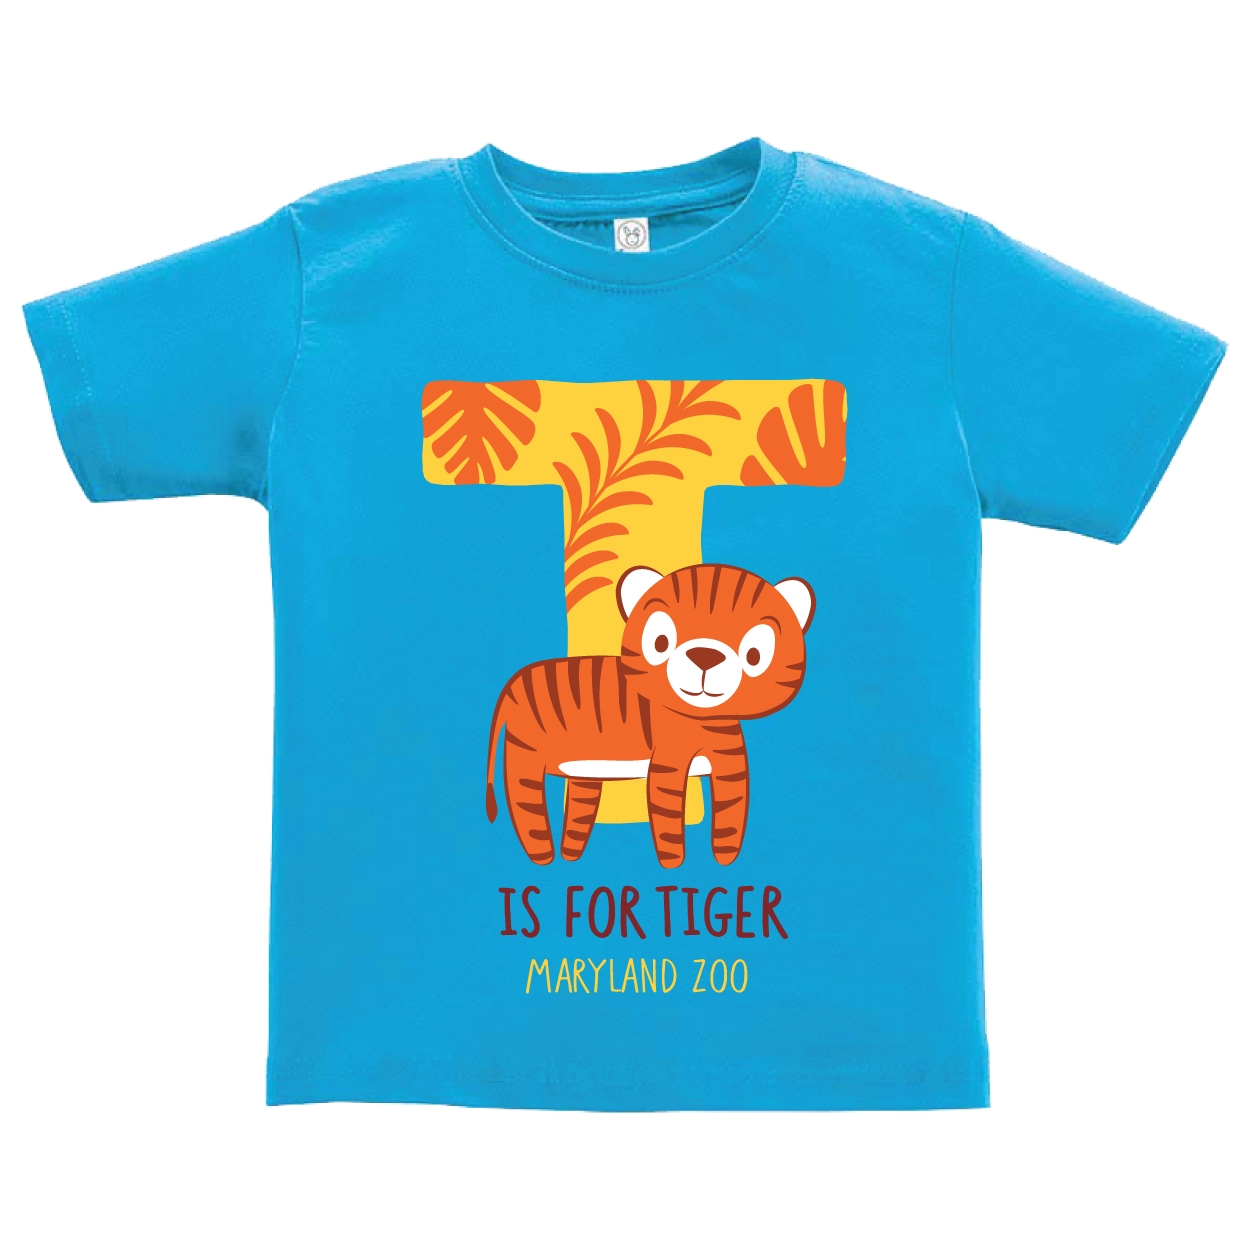 TODDLER T IS FOR TIGER